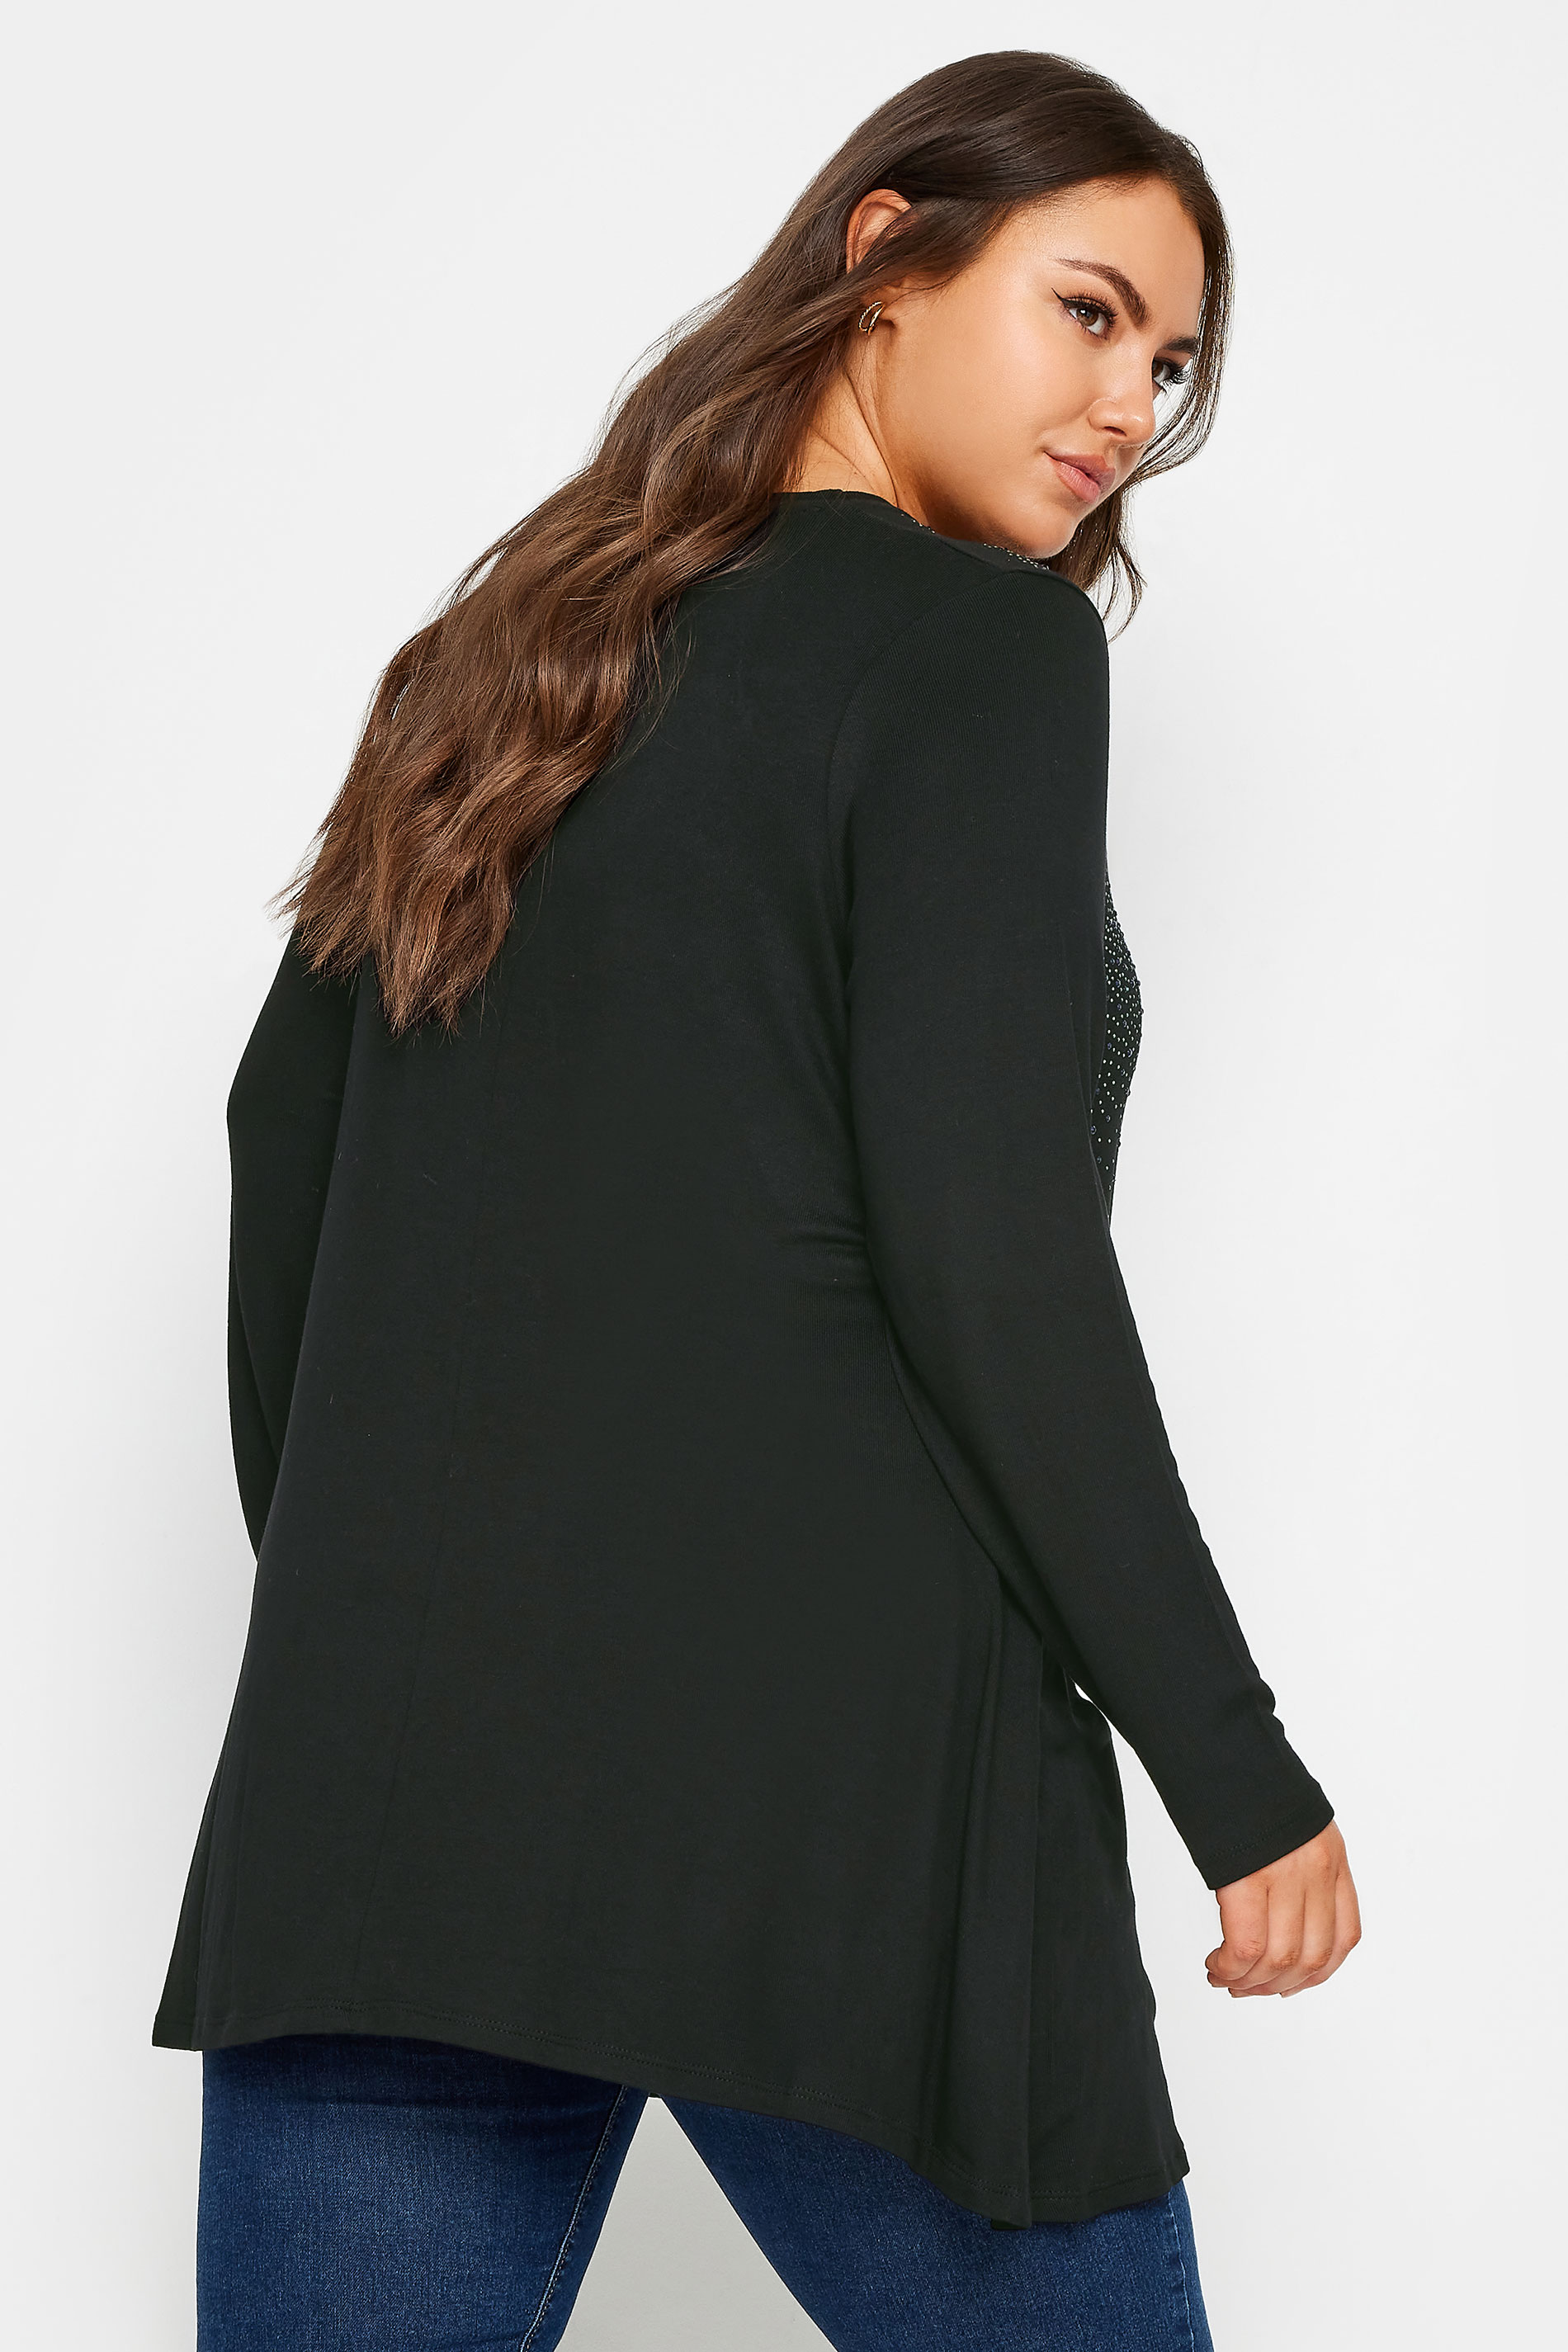 YOURS Plus Size Black Stud Embellished Long Sleeve Top | Yours Clothing 3